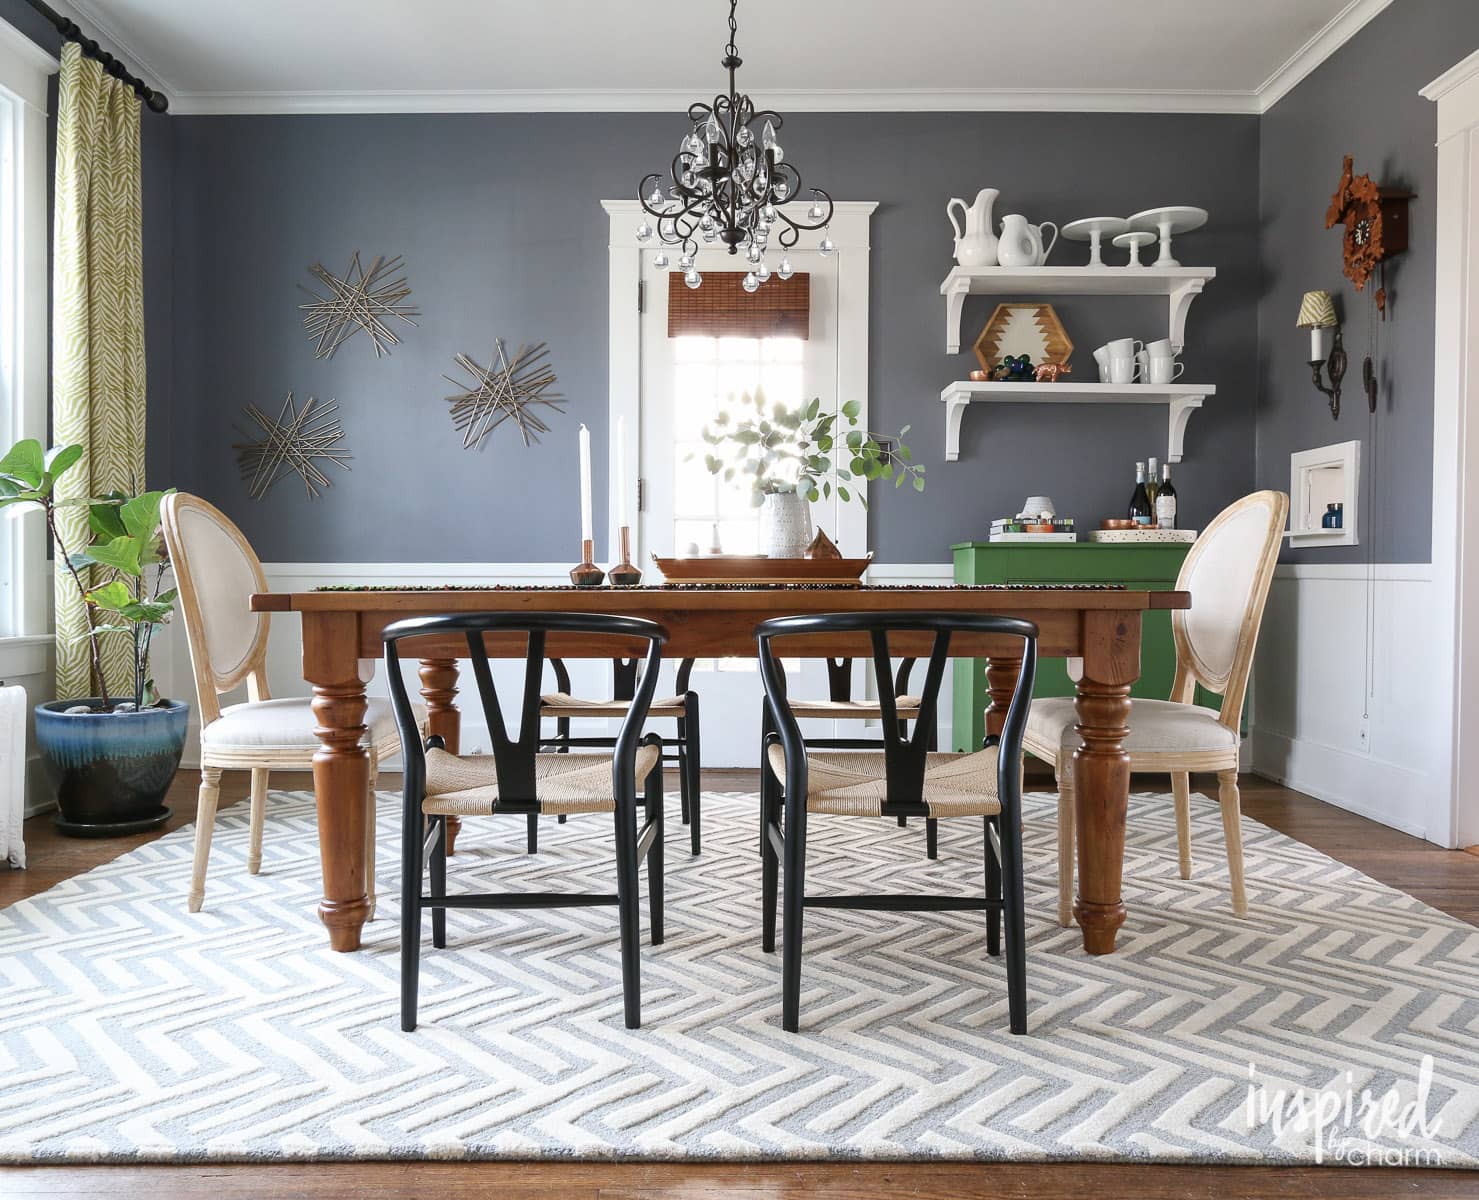 Pictures Of Dining Room With Rugs